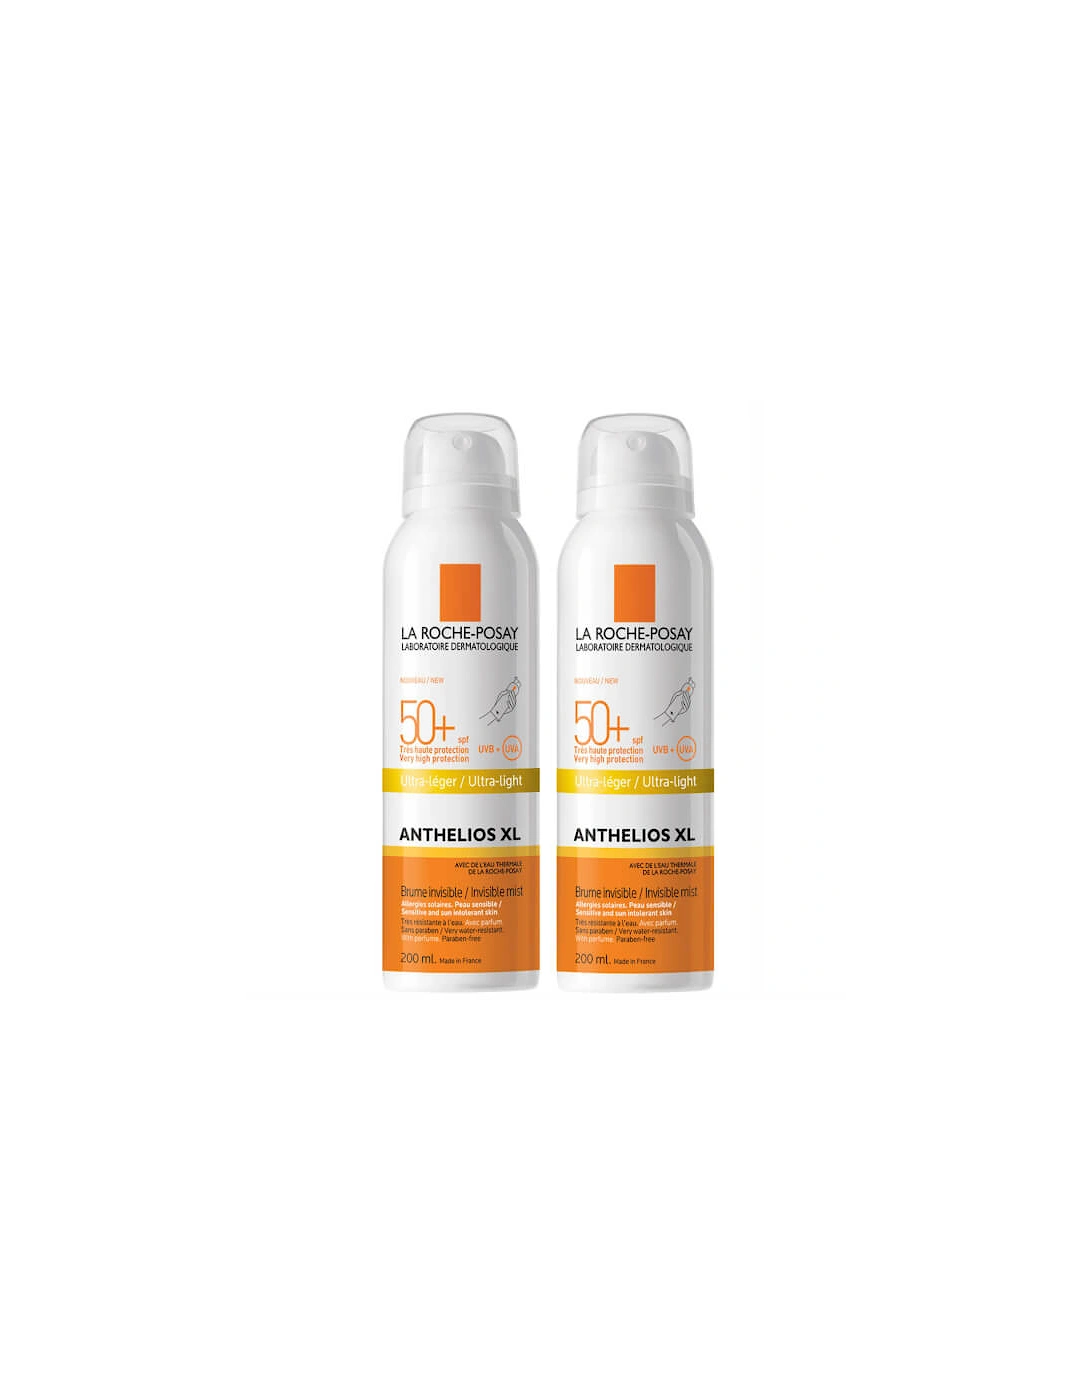 La Roche-Posay Anthelios Ultra-Light SPF50+ Sun Protection Spray 200ml Duo, 2 of 1